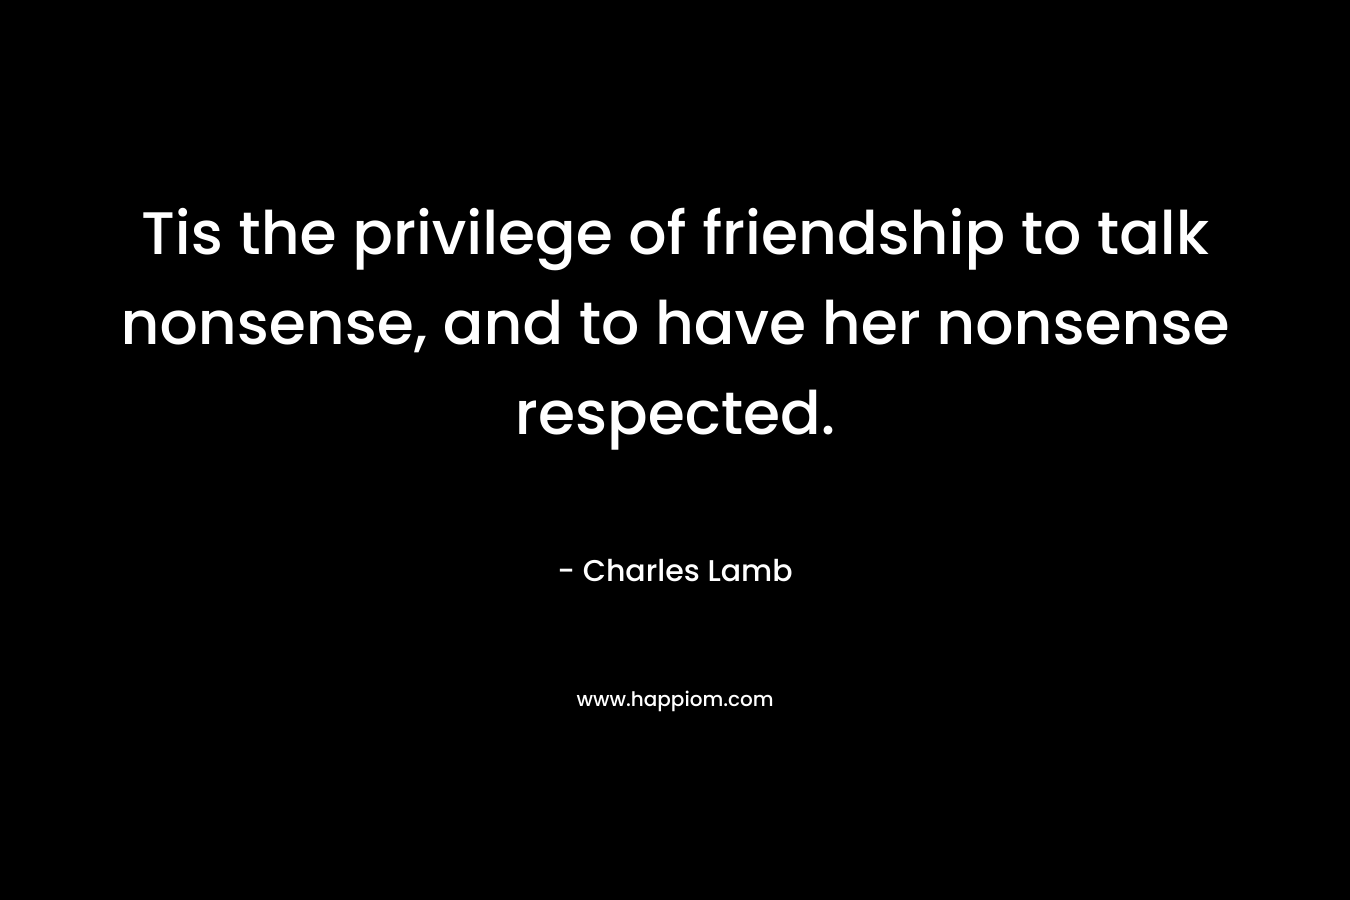 Tis the privilege of friendship to talk nonsense, and to have her nonsense respected. – Charles Lamb